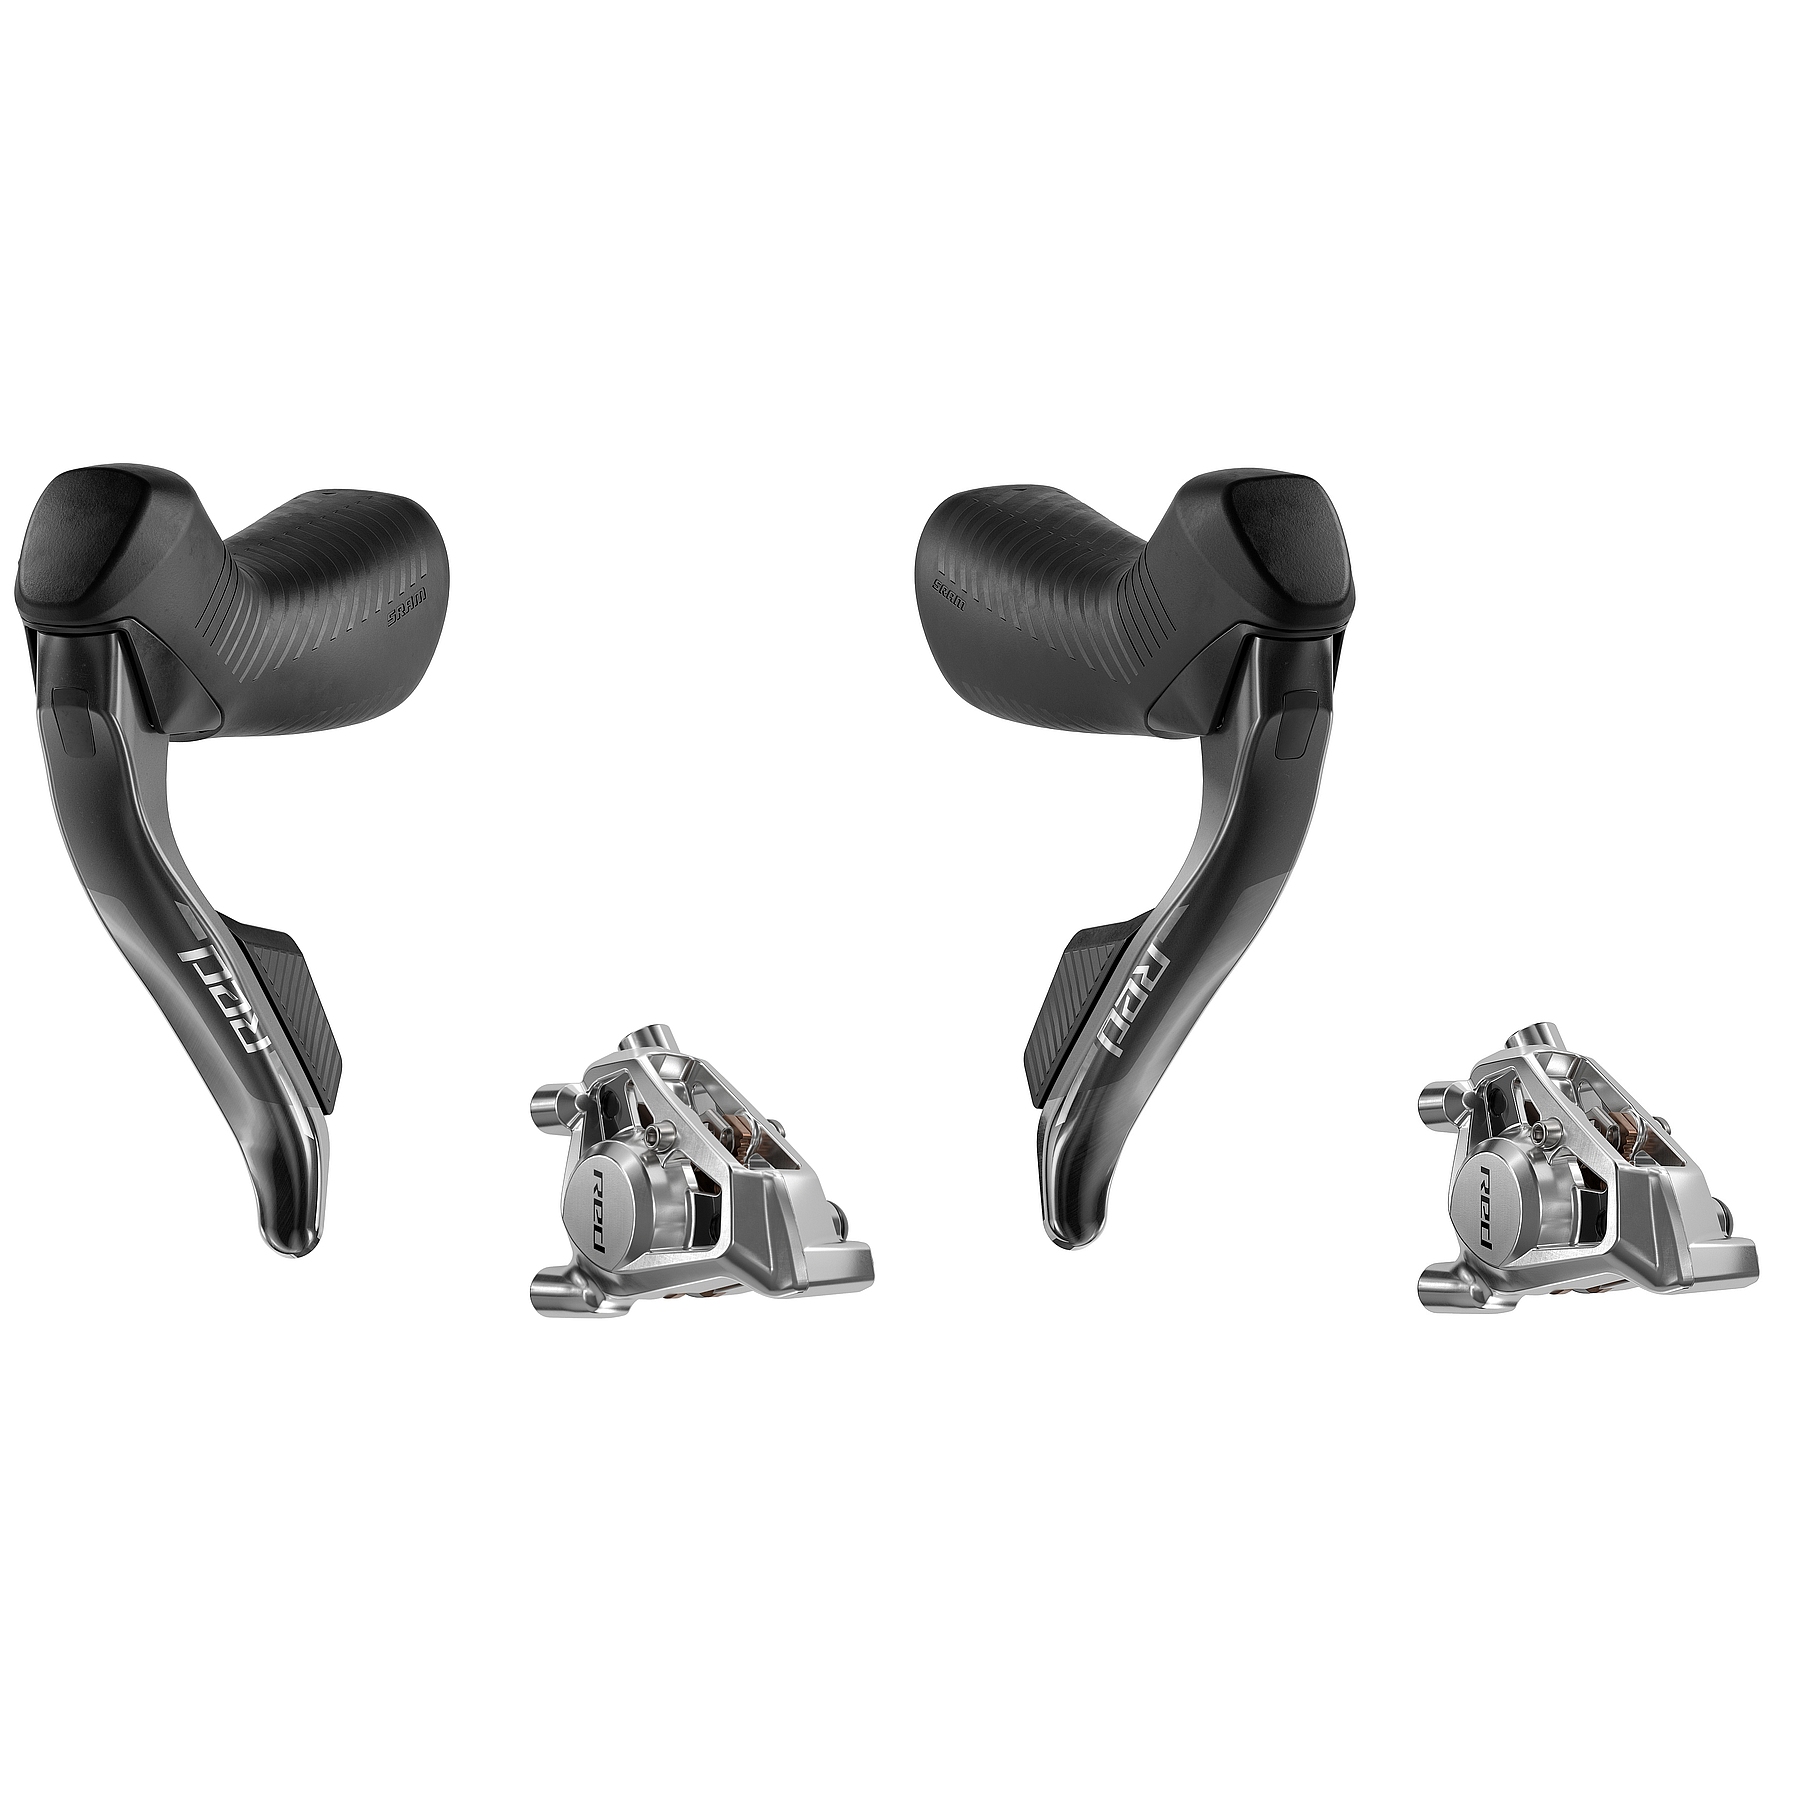 Picture of SRAM RED AXS HRD Shift-Brake Control + Hydraulic Disc Brake Set | Flat Mount | 2x12-speed | E1 - front left / rear right